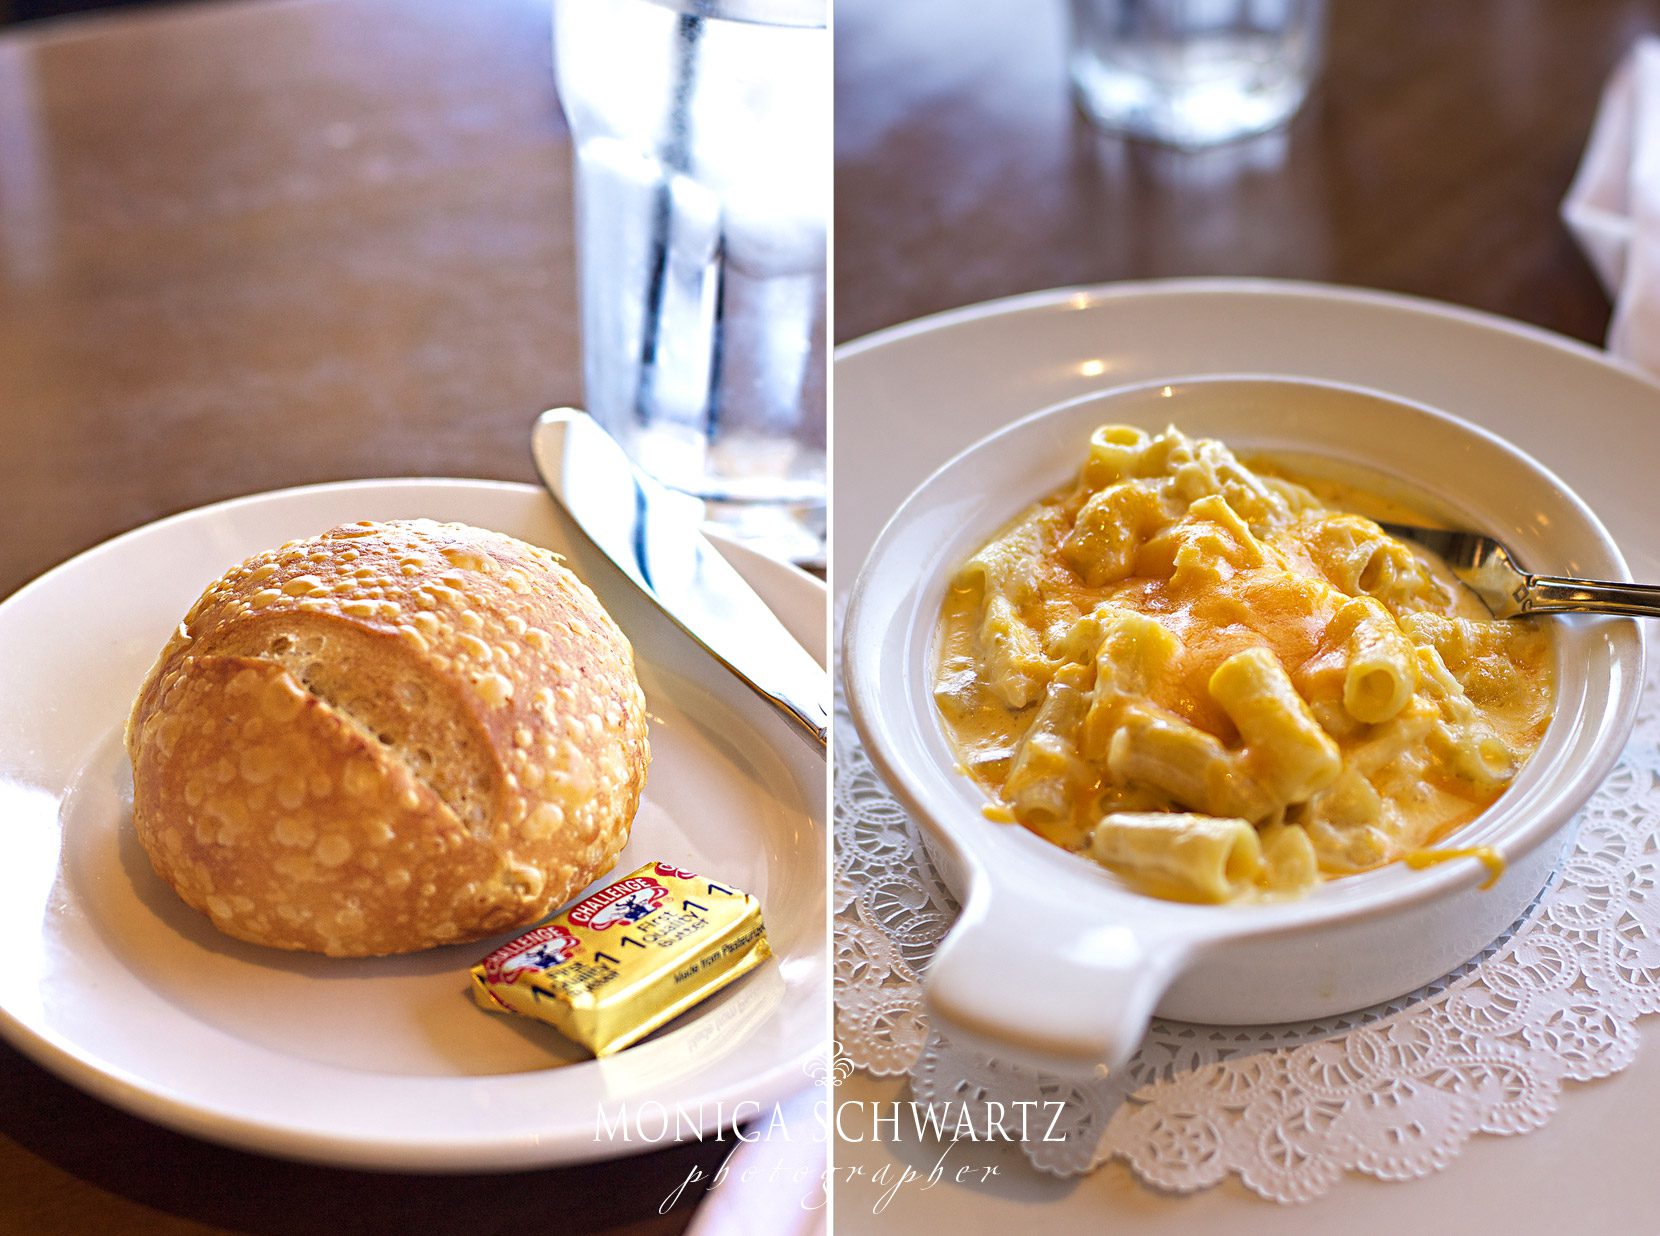 Sourdough-bread-roll-and-butter-and-Lobster-mac-and-cheese-at-Scales-Restaurant-at-Fishermans-Wharf-in-Monterey-California